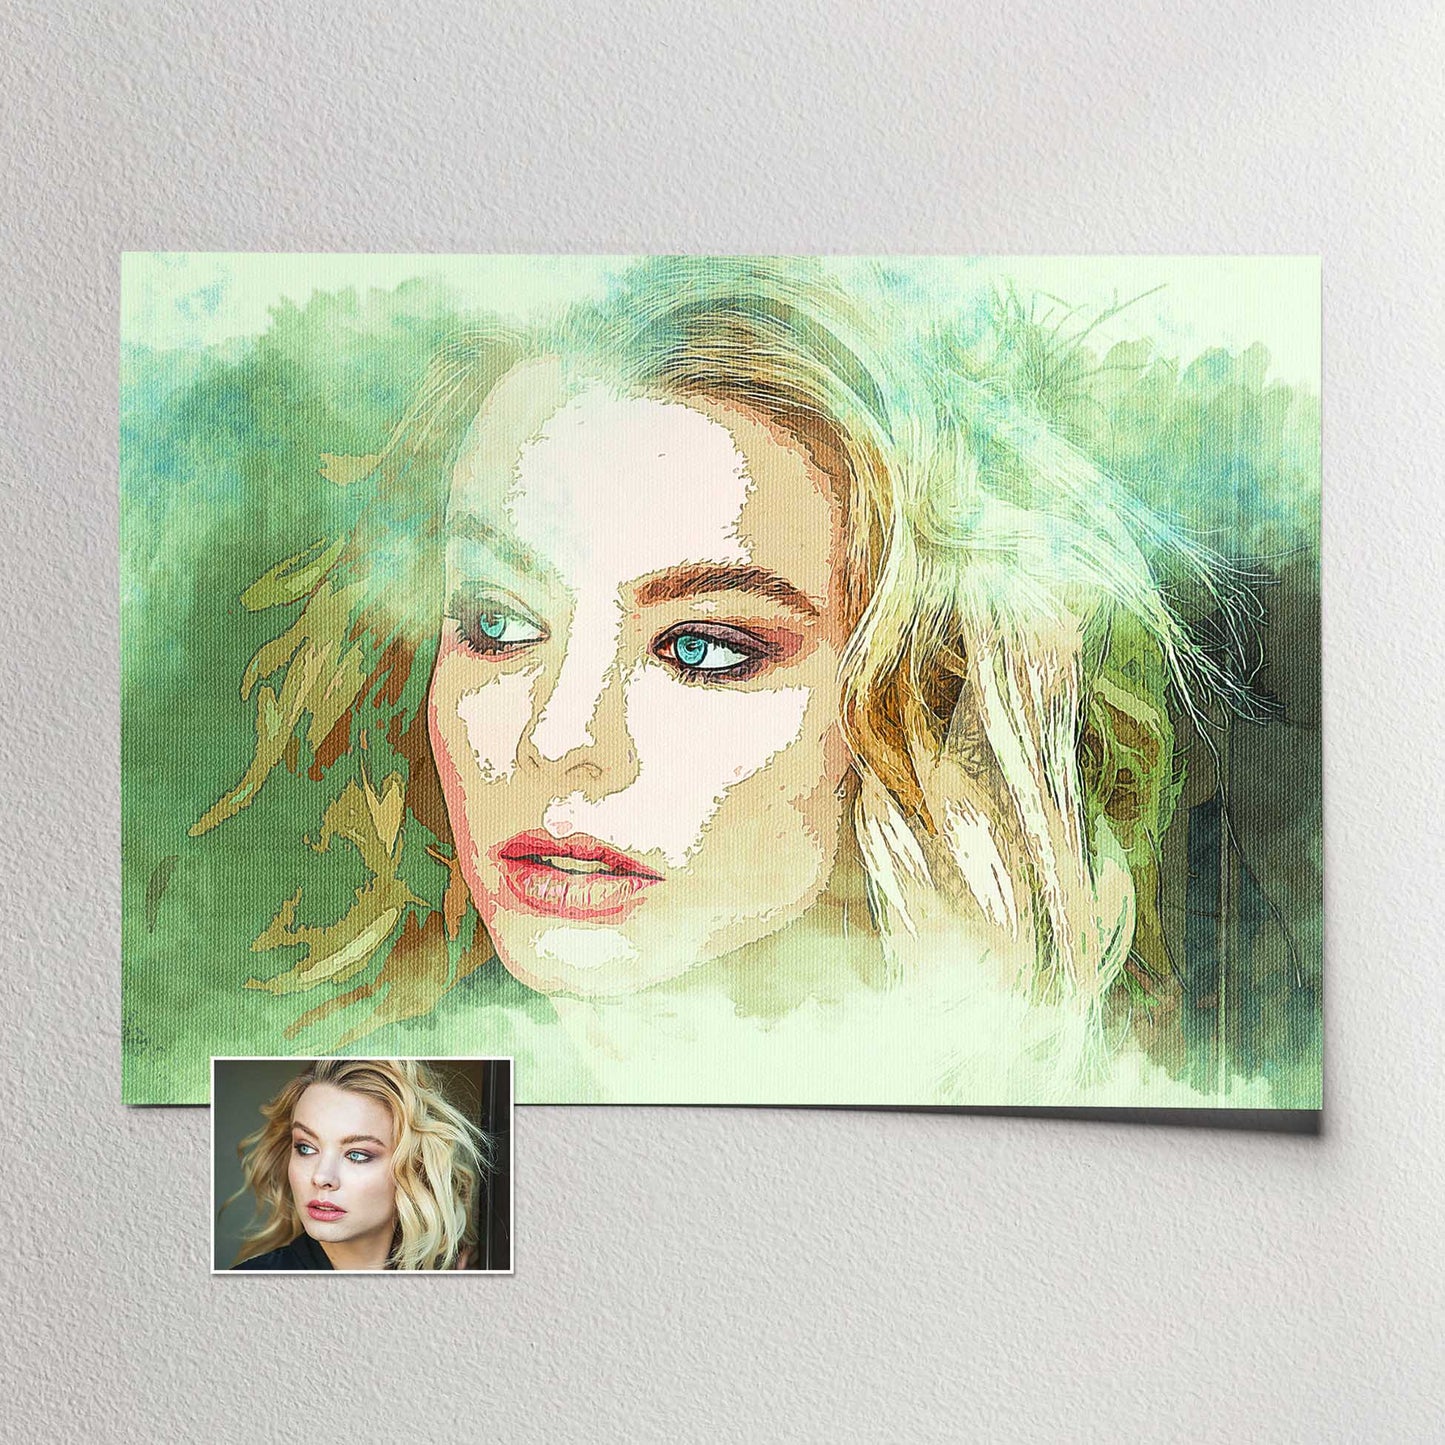 Create a stunning focal point with a Personalised Watercolor Texture Print, showcasing your photo in a traditional and classic watercolor style. The realistic painting and creative texture effect add depth and dimension